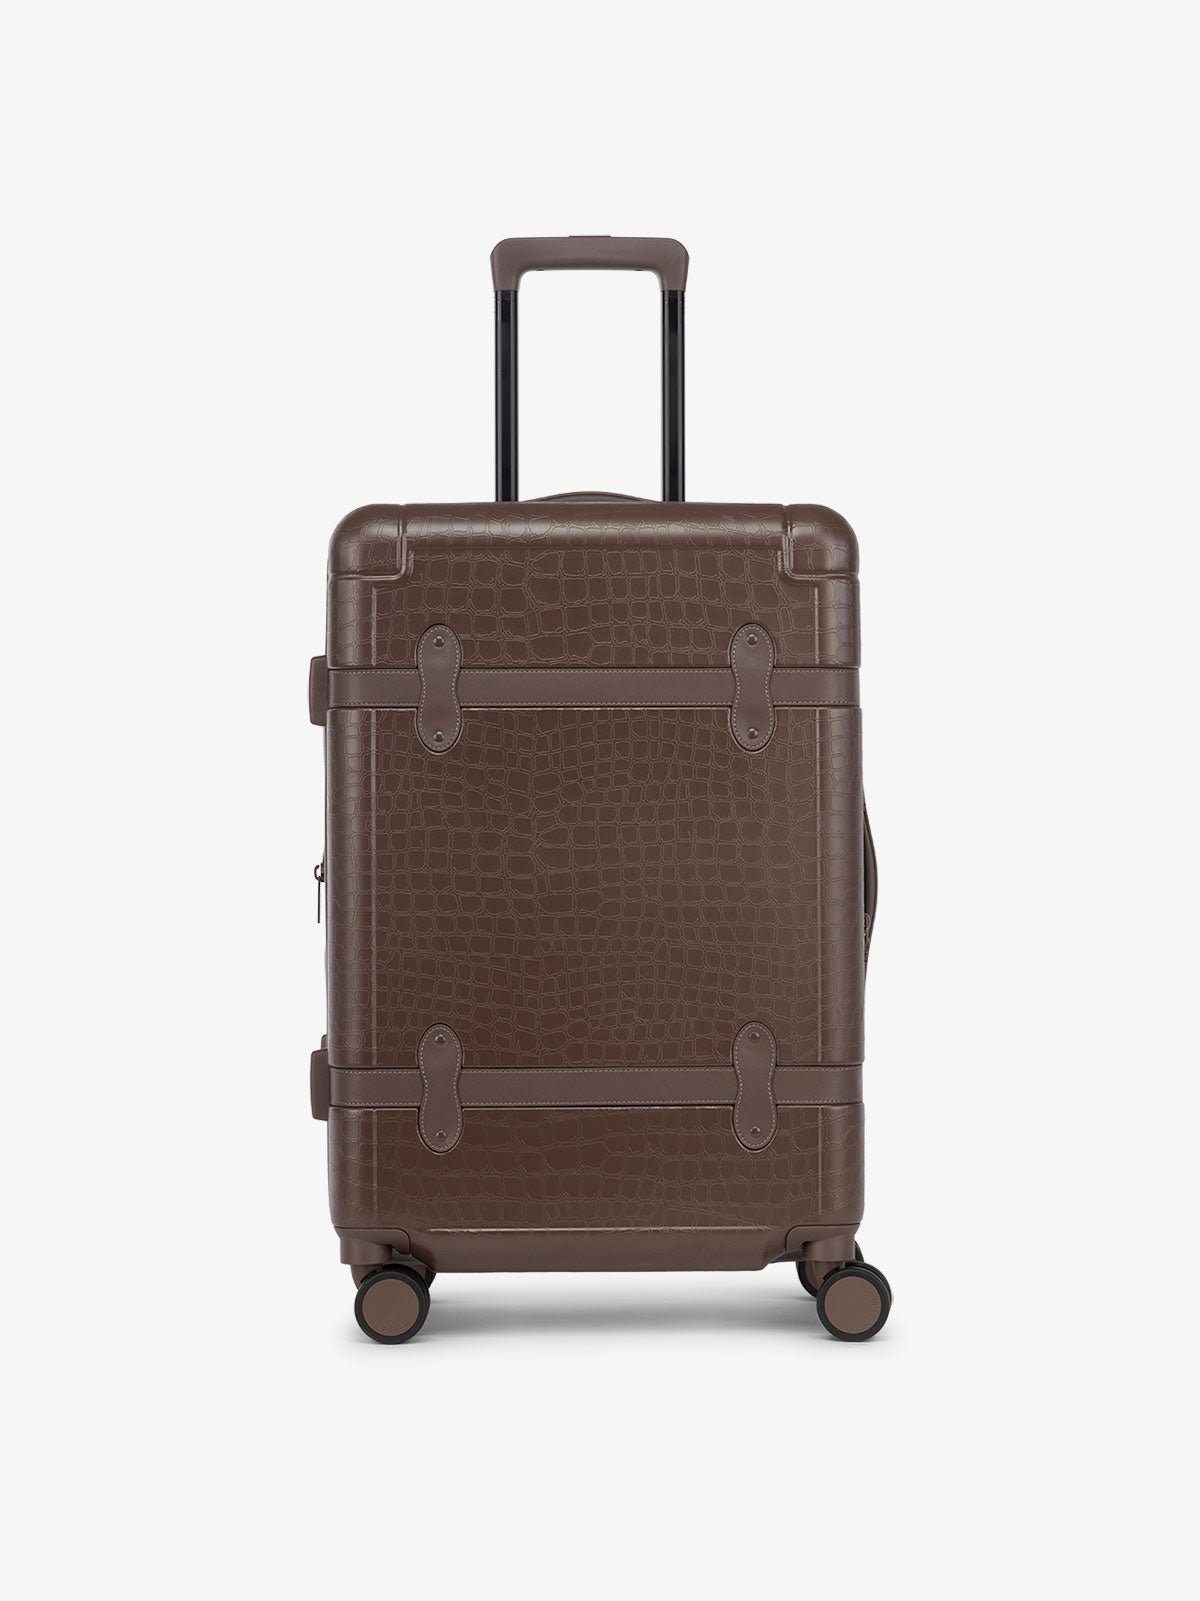 CALPAK TRNK medium 25 inch luggage with 360 spinner wheels and faux crocodile design in vintage trunk style in espresso